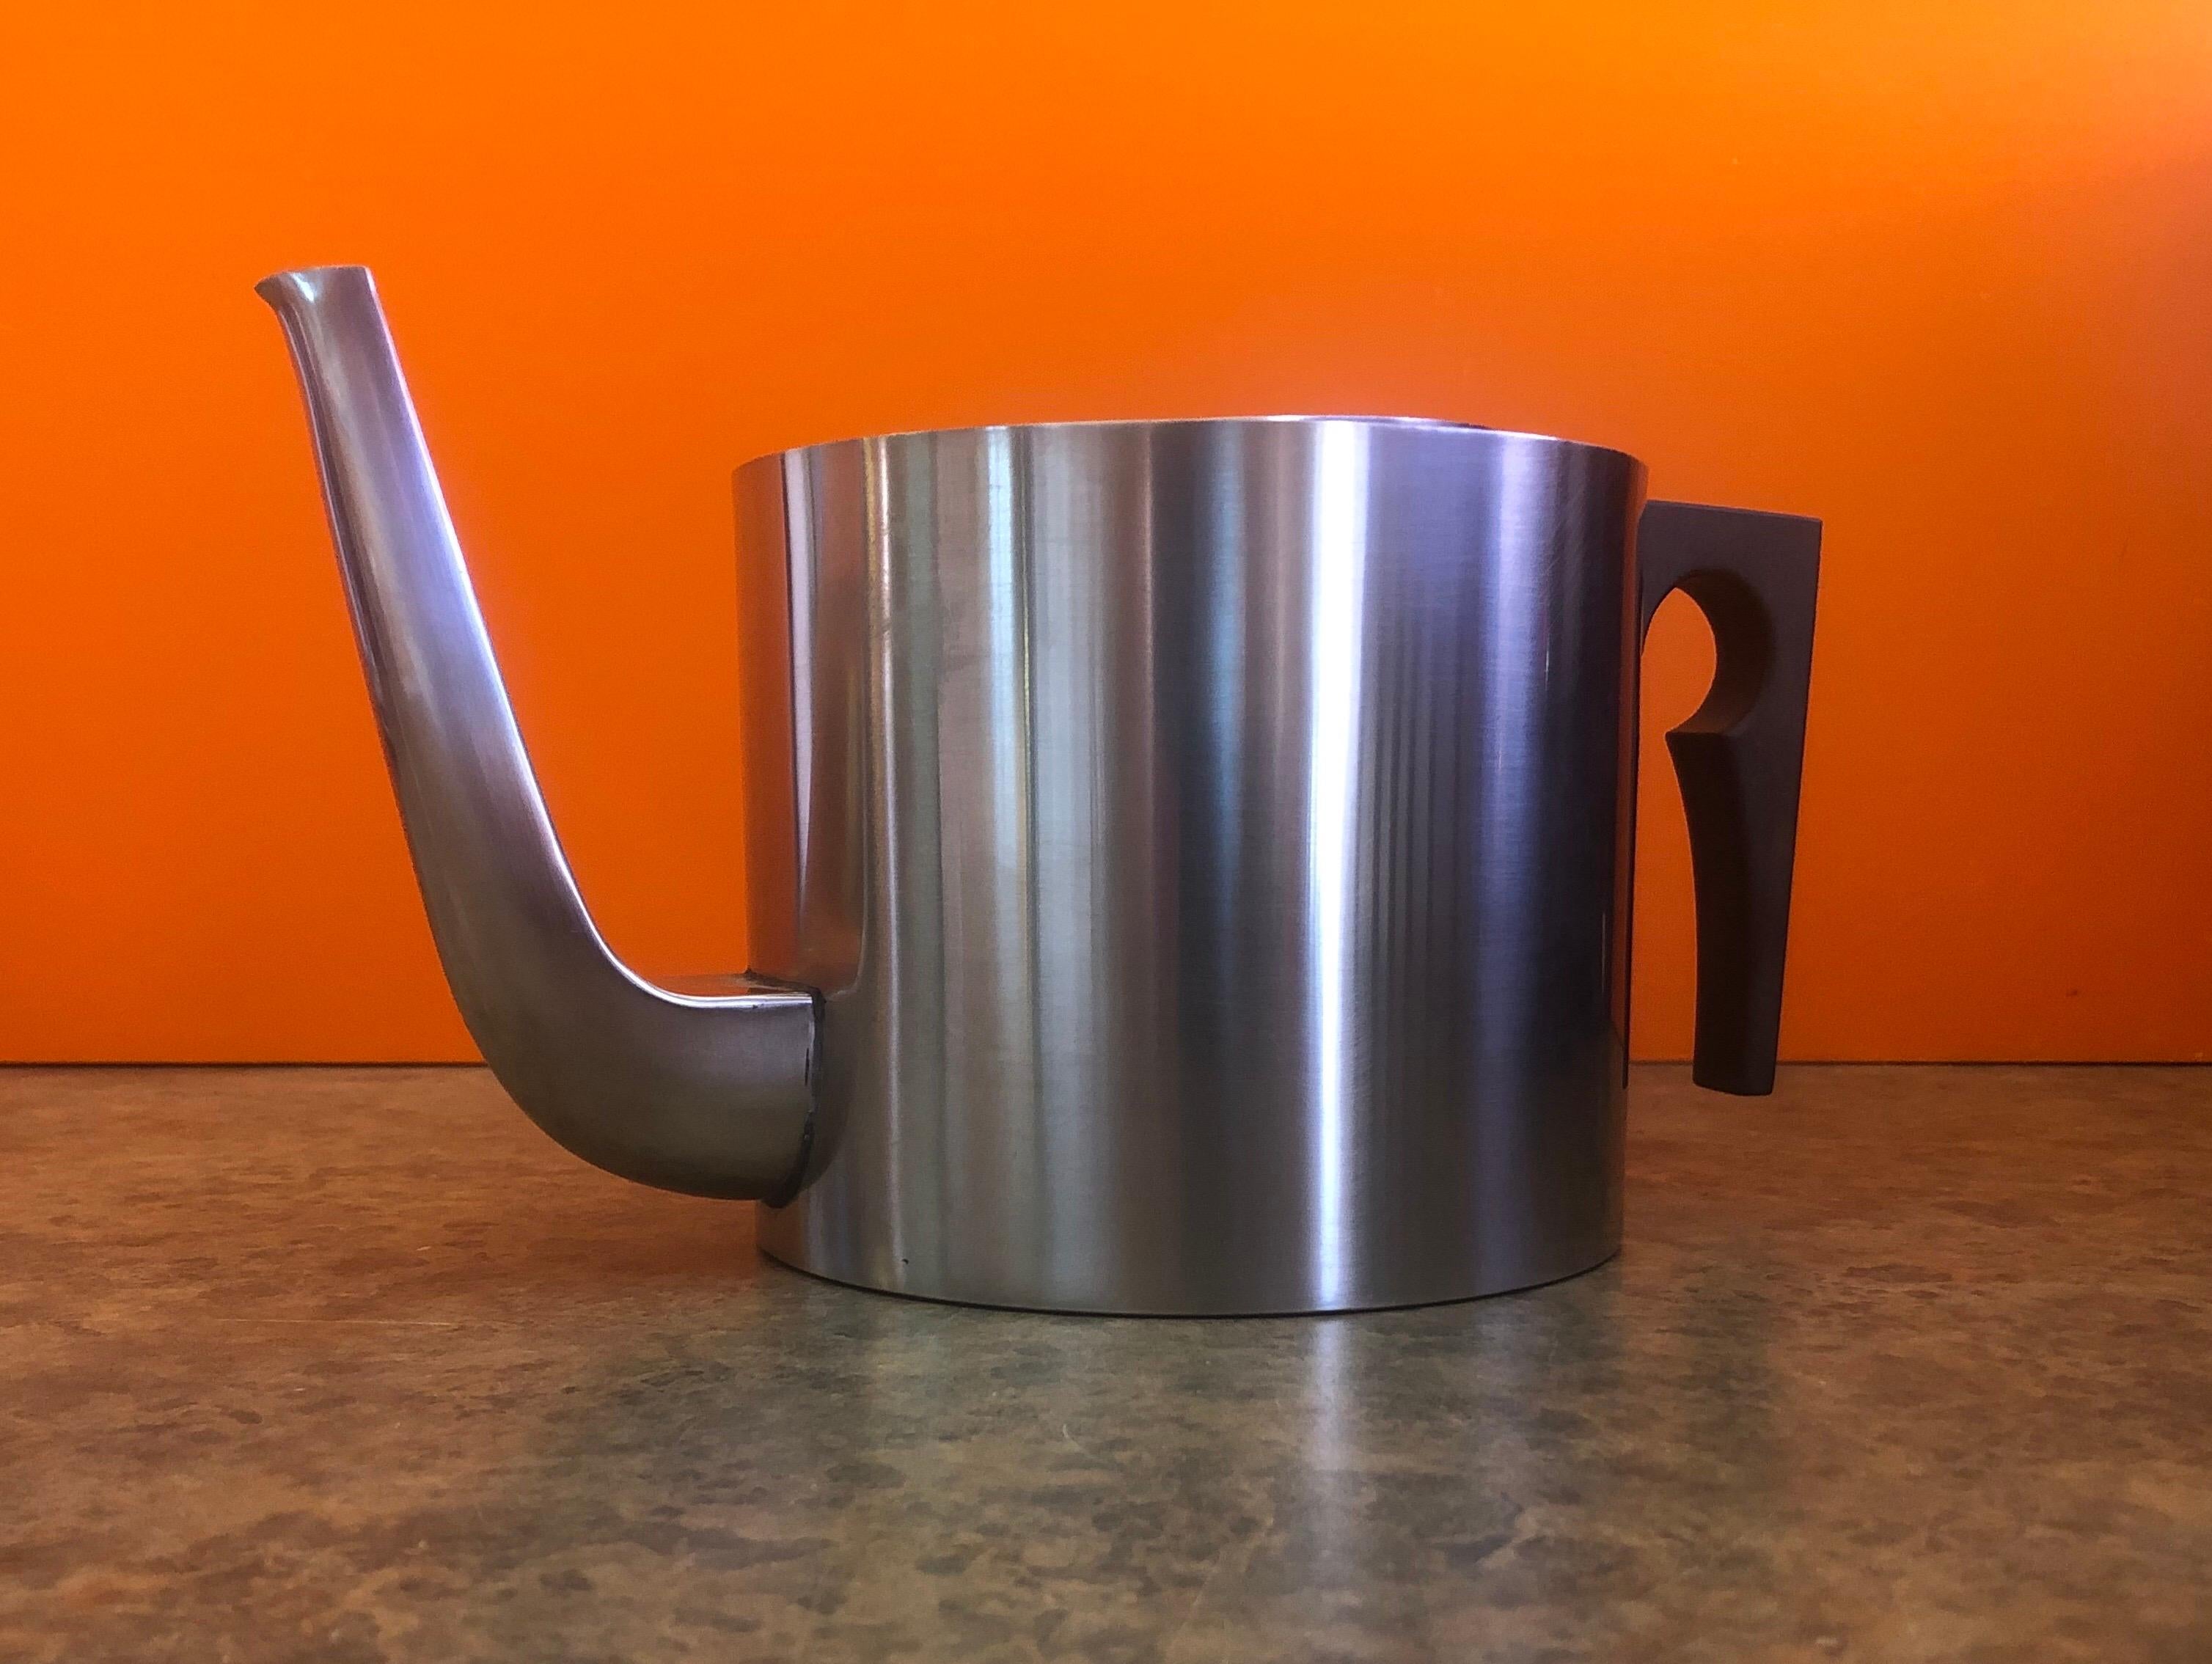 Beautiful midcentury stainless steel low profile tea pot by Arne Jacobsen for Lauffer / Stelton, circa 1960s.

Arne Jacobsen was one of the most influential Danish designers of his time for modern, timeless pieces that still are coveted today.